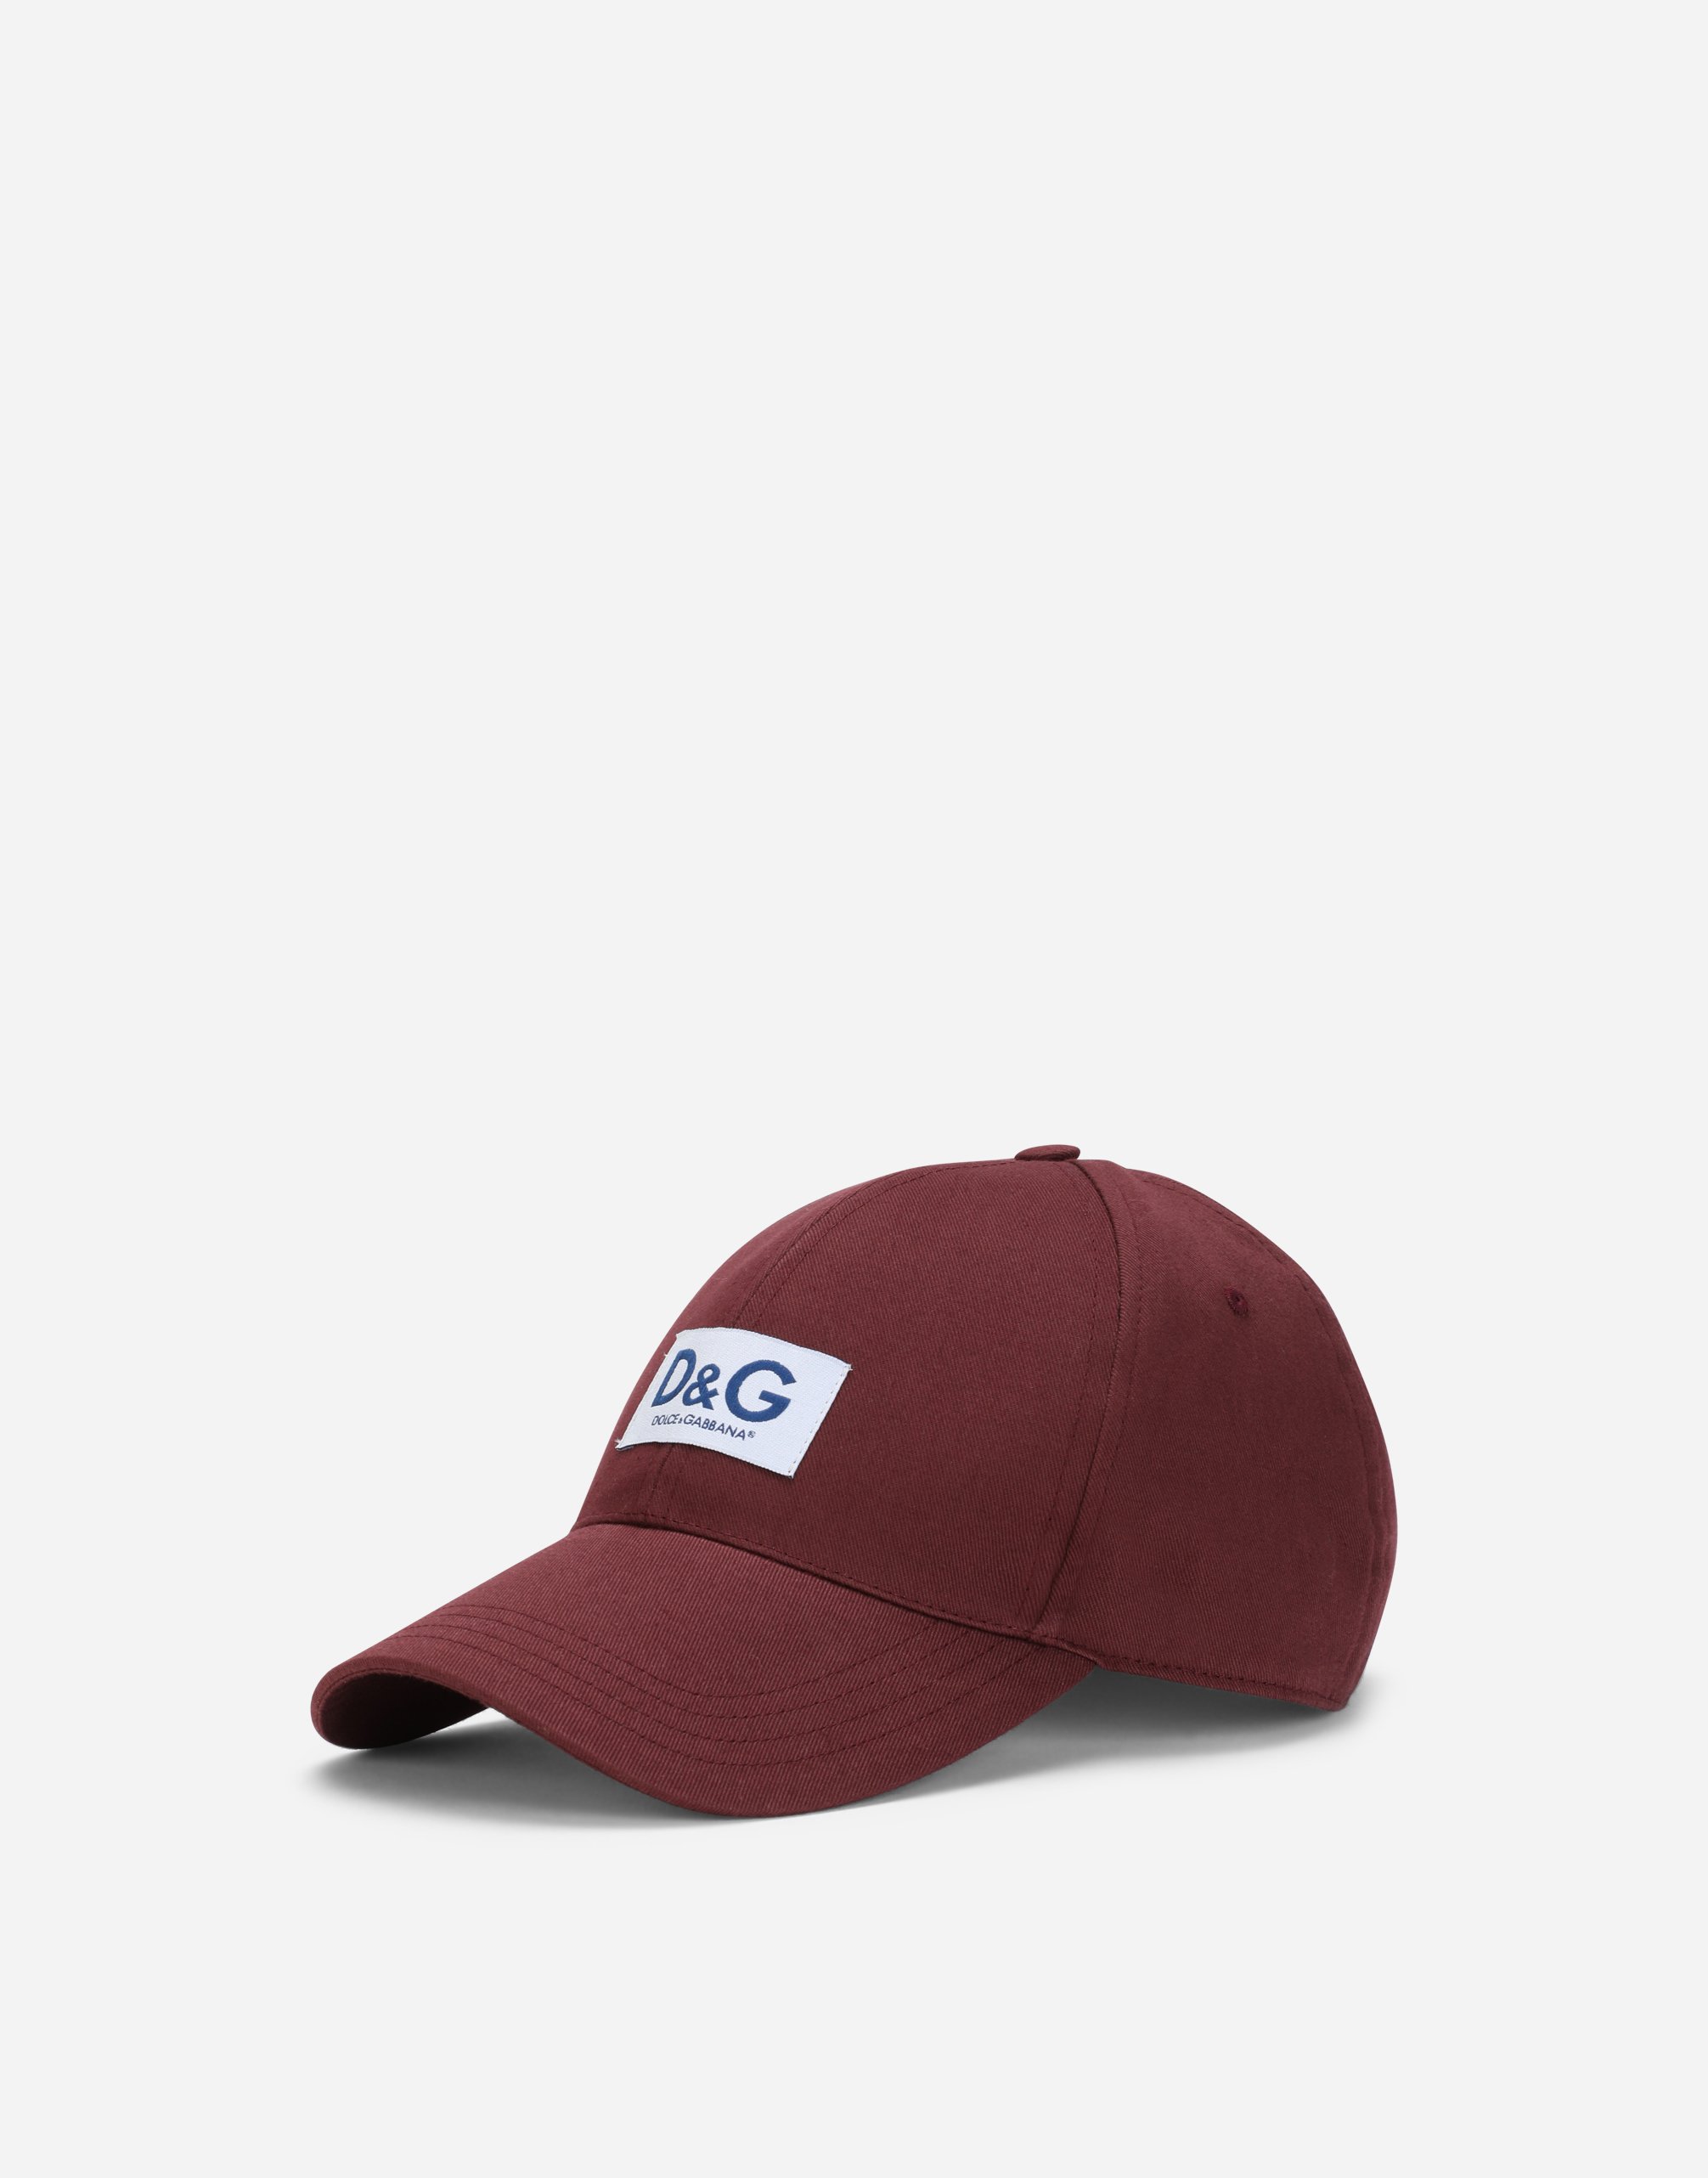 Baseball cap with DG patch in Bordeaux